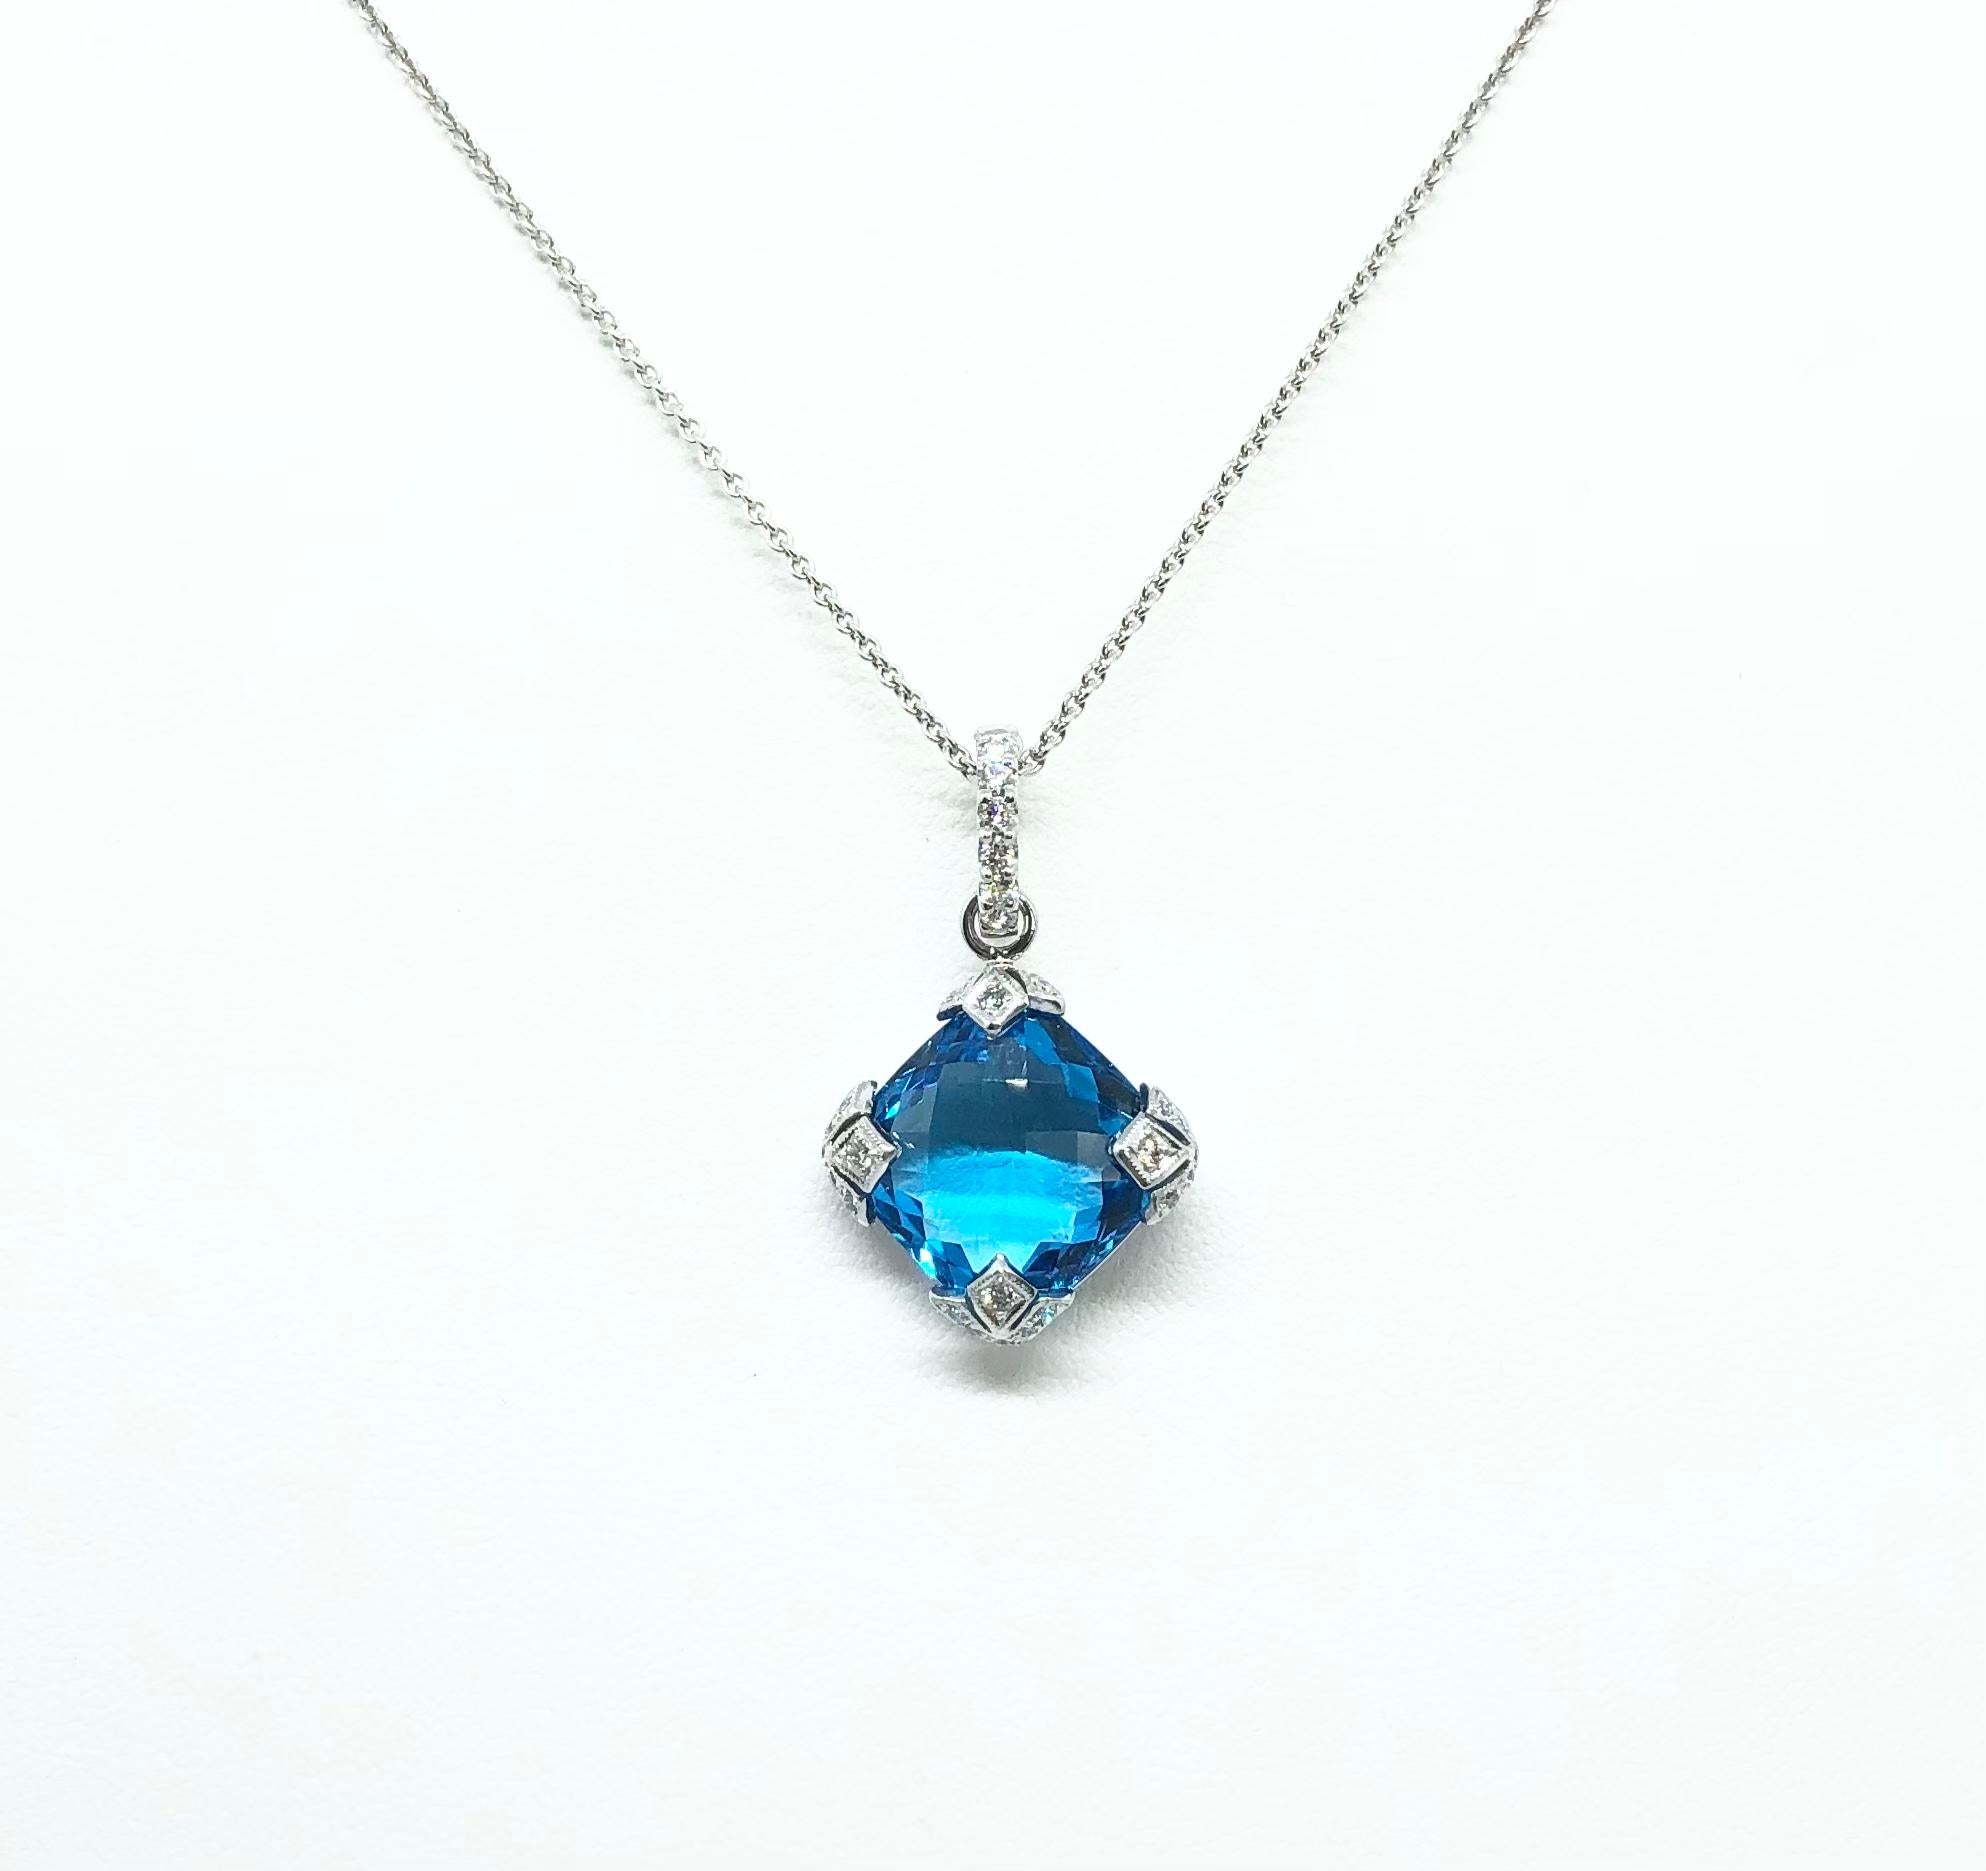 Blue Topaz 10.63 carats with Diamond 0.10 carat Pendant set in 18 Karat White Gold Settings
(chain not included)

Width: 1.5 cm 
Length: 3.0 cm
Total Weight: 5.36  grams

